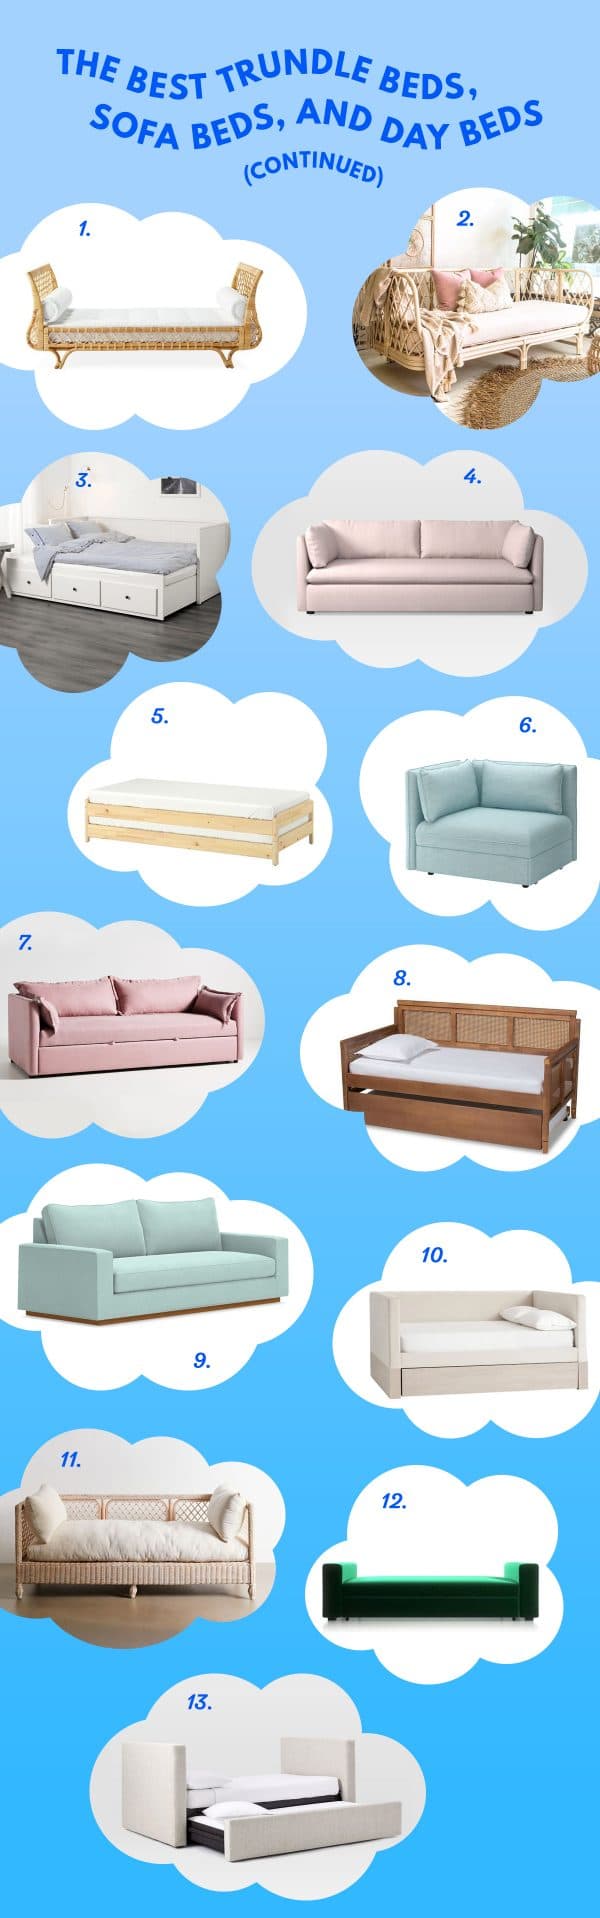 The Best Trundle Beds, Day Beds, and Sofa Beds